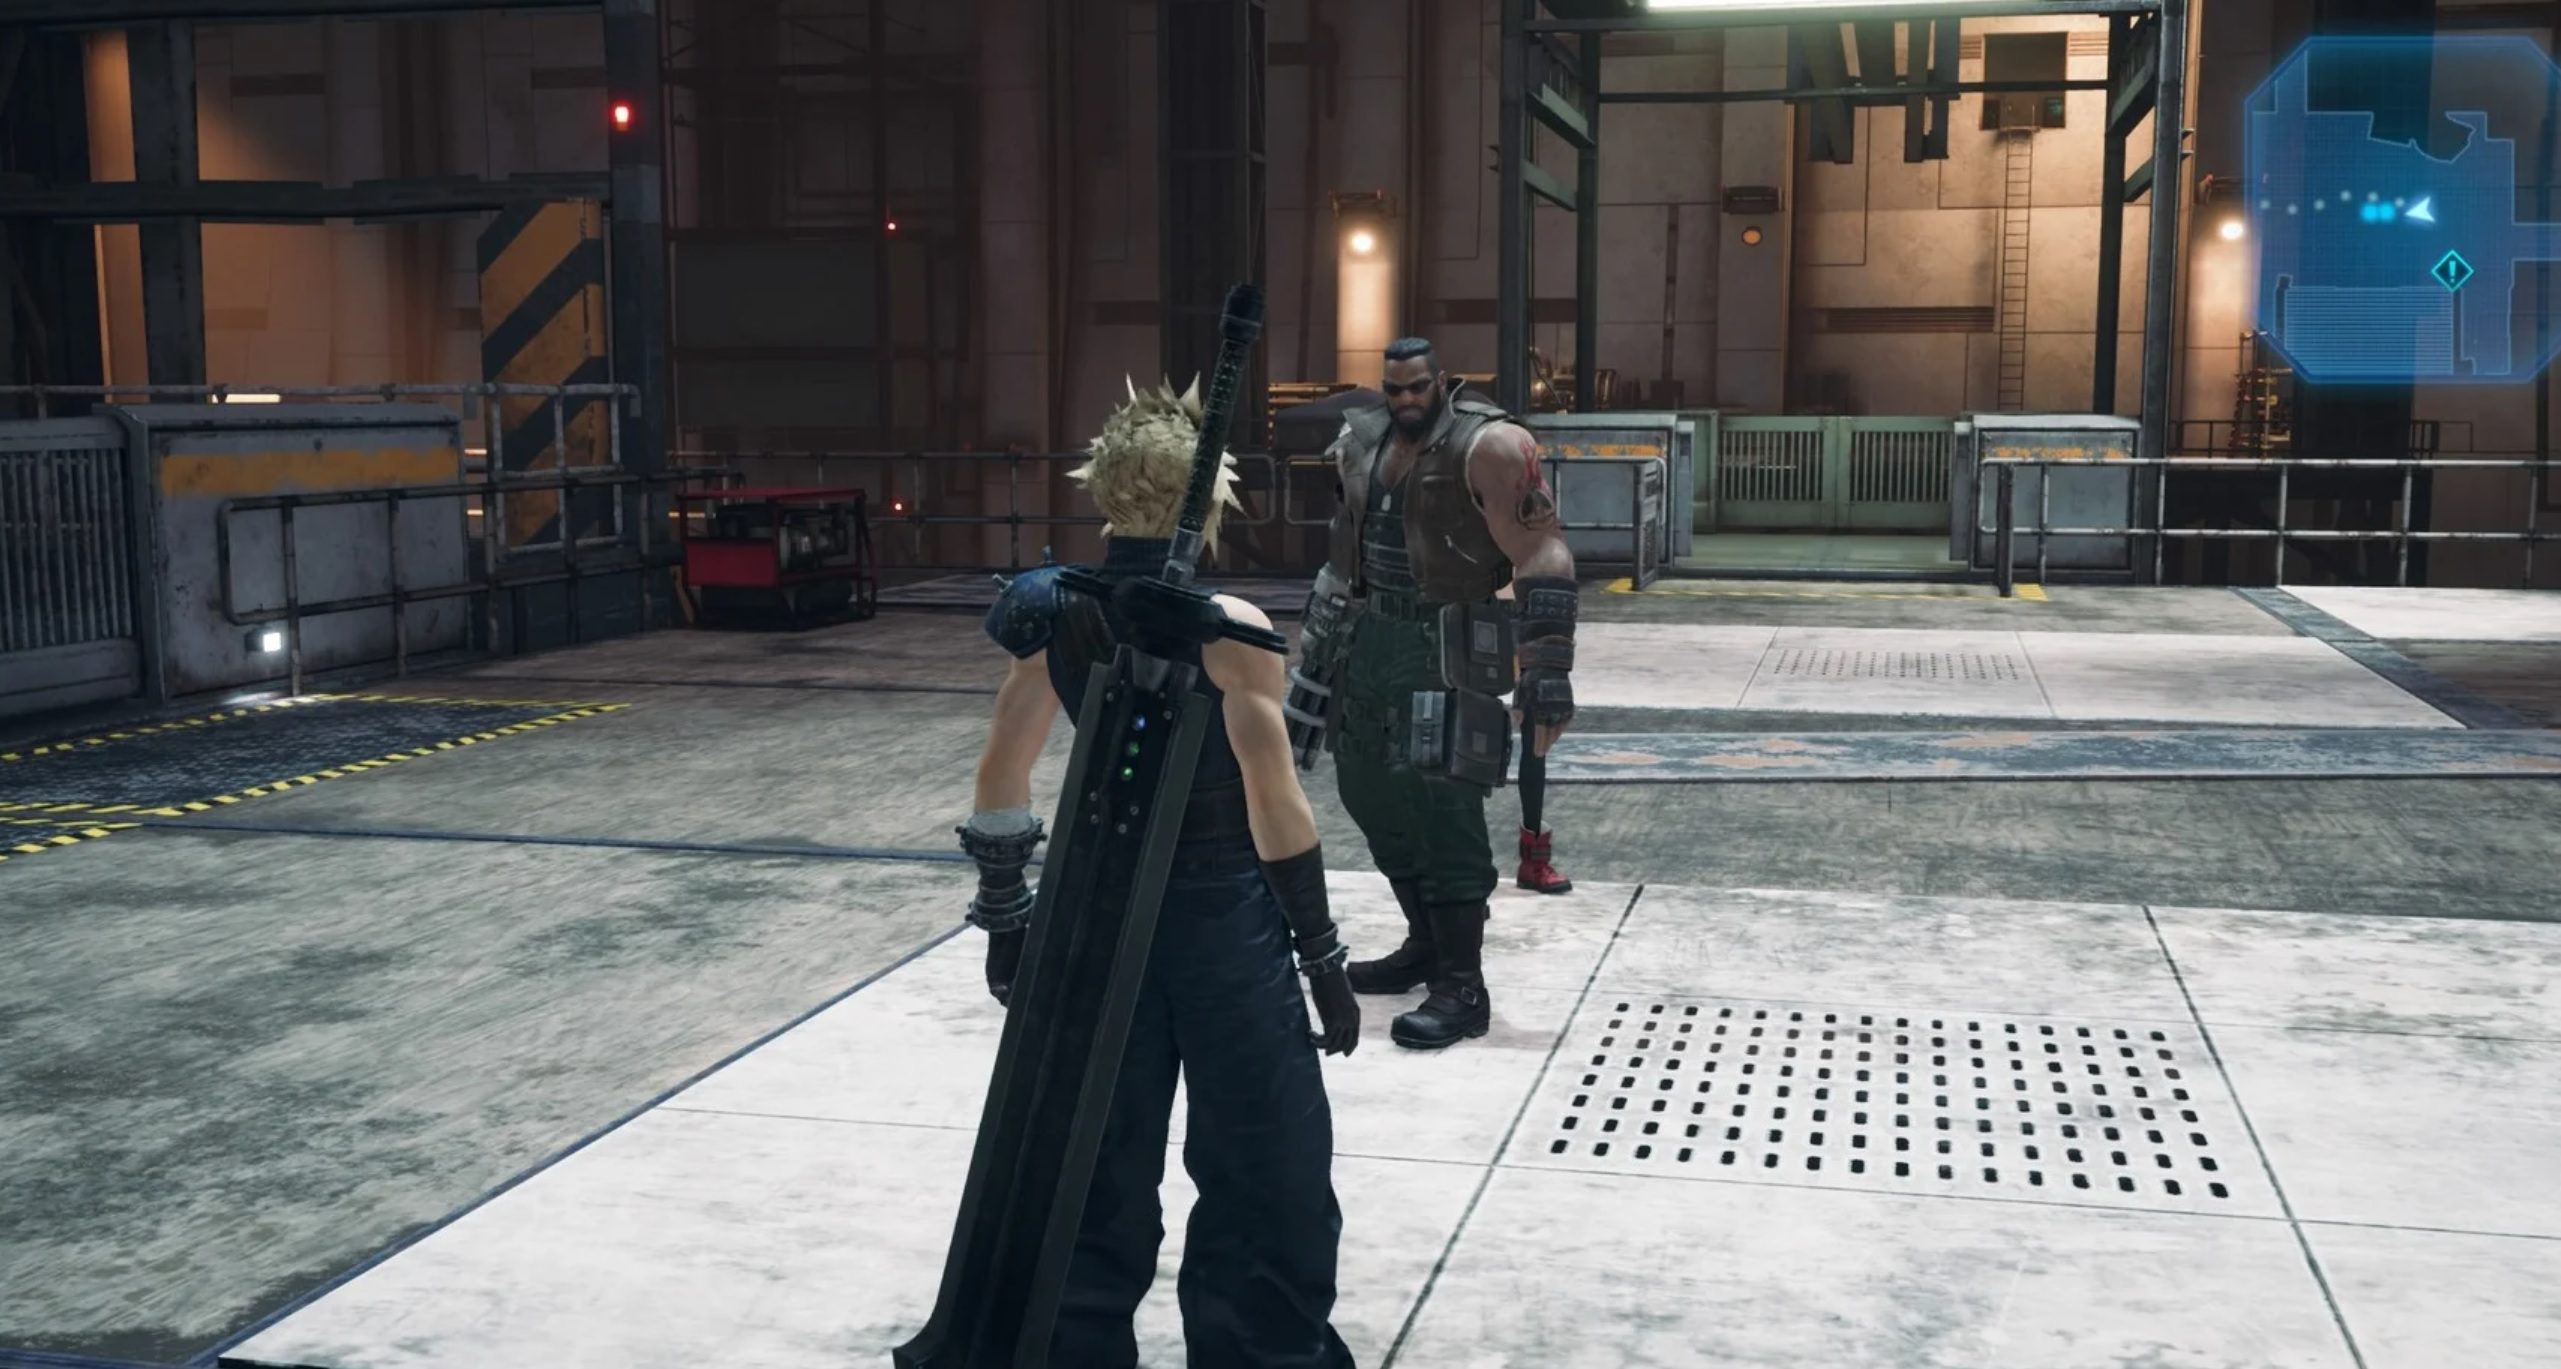 Final Fantasy 7 Remake Xbox One 2020 release date leaked by